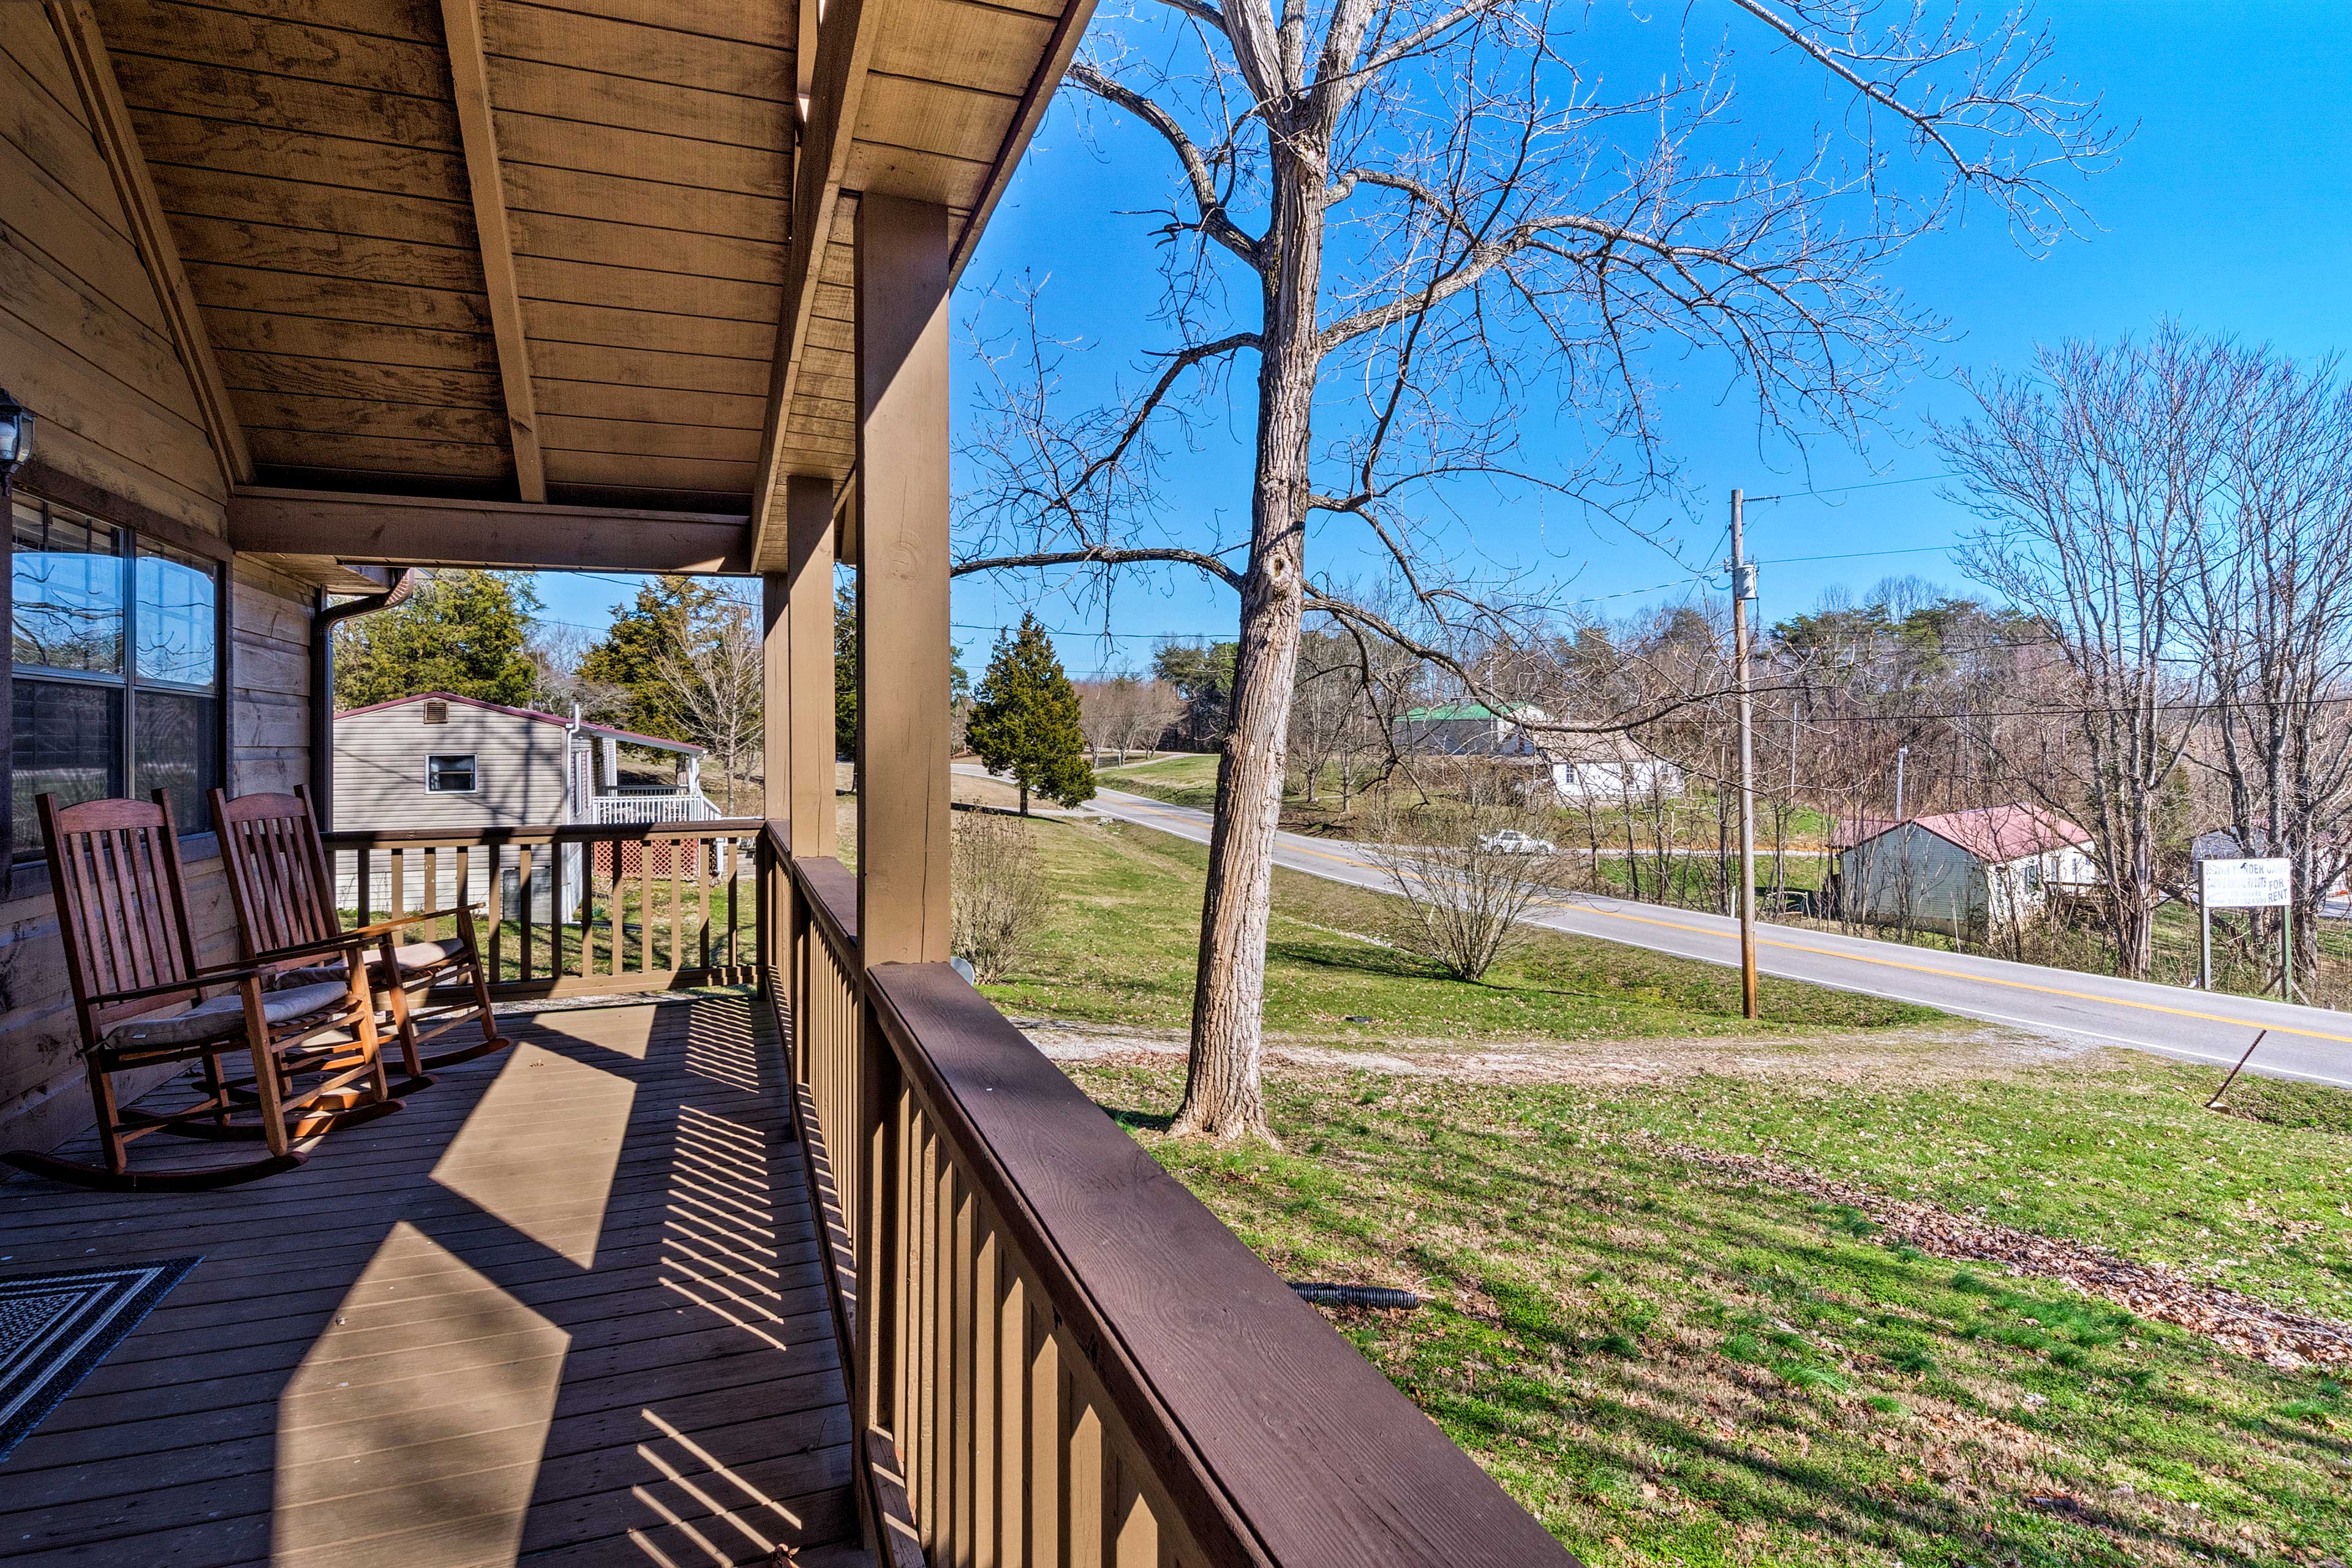 Take in the views from the charming front porch.